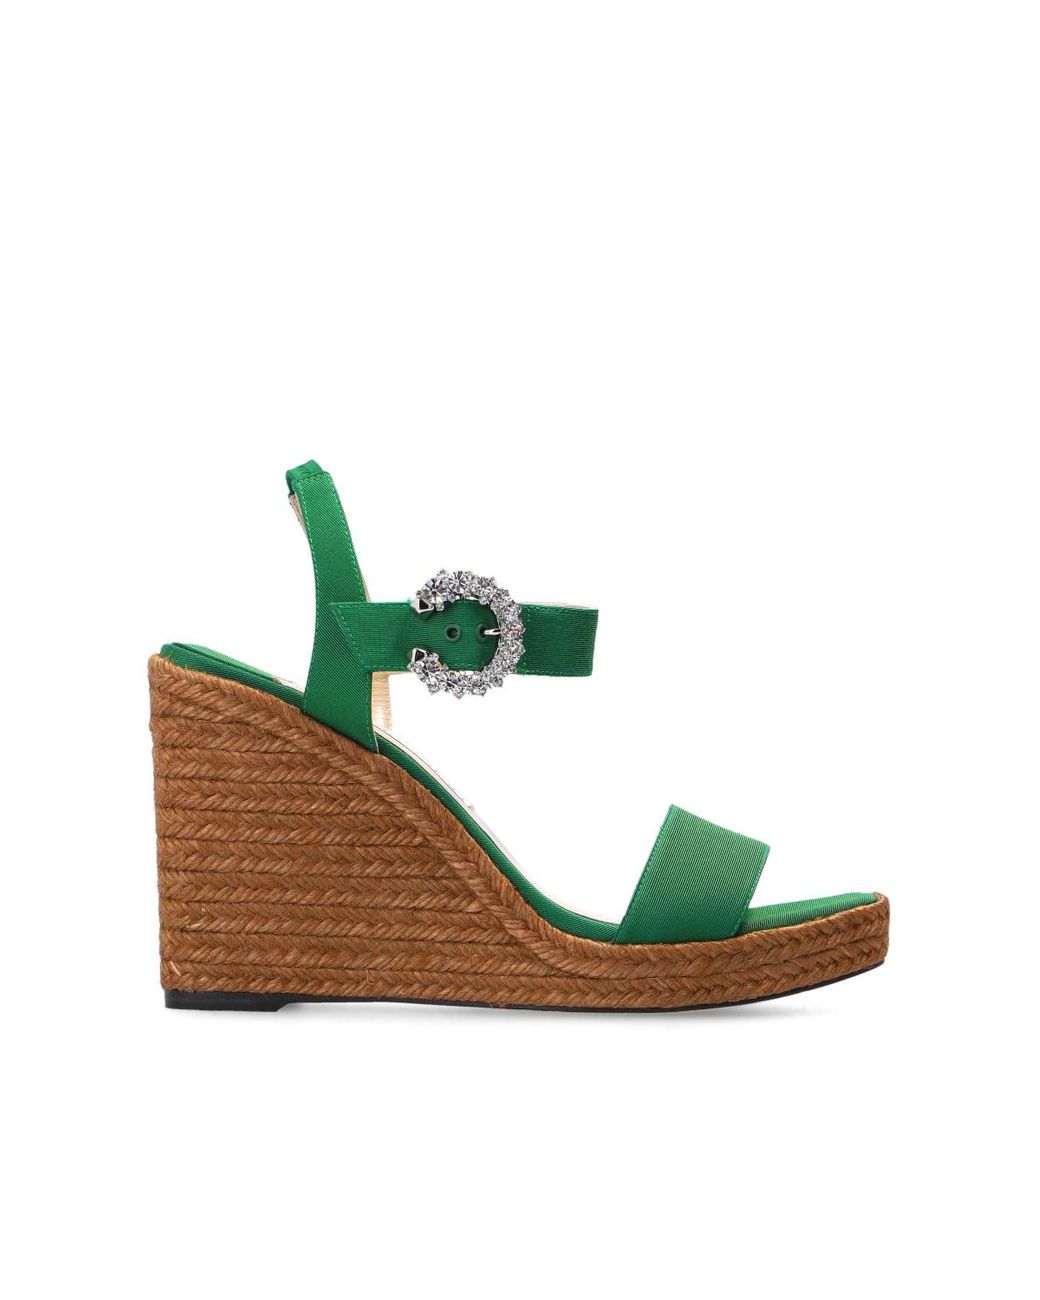 Jimmy Choo Leather 'mirabelle' Wedge Sandals in Green - Lyst